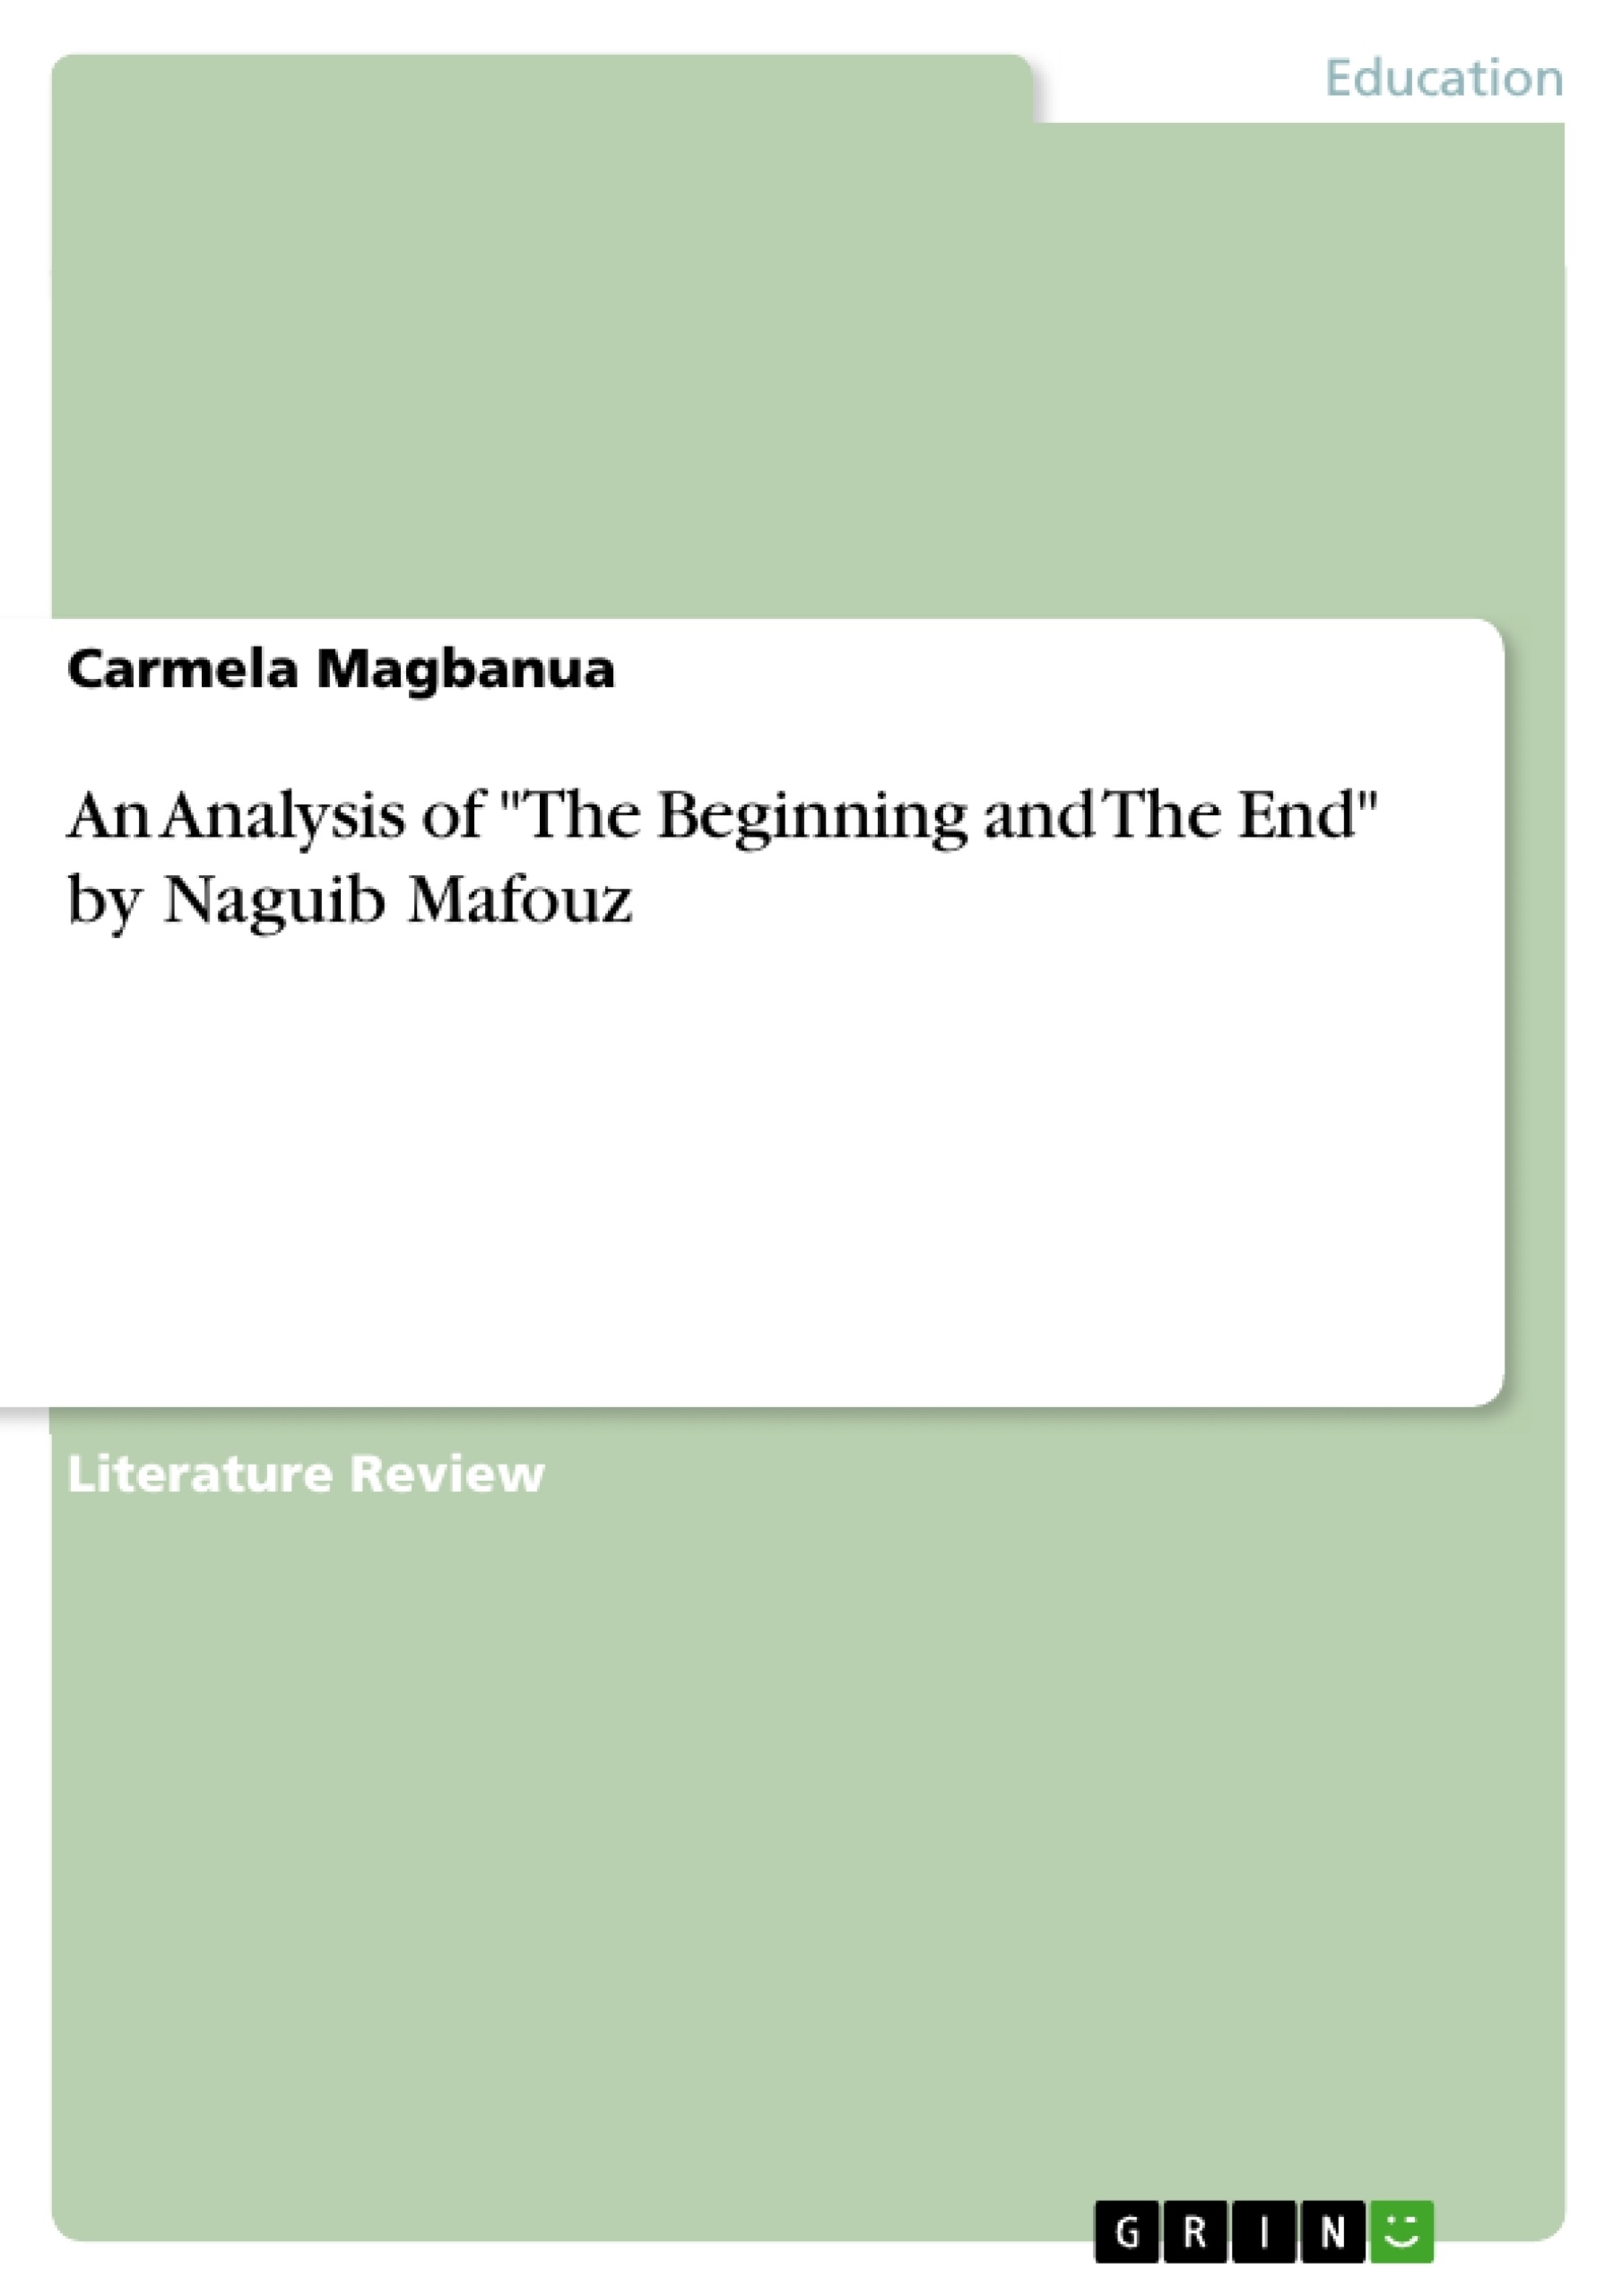 Titel: An Analysis of "The Beginning and The End" by Naguib Mafouz